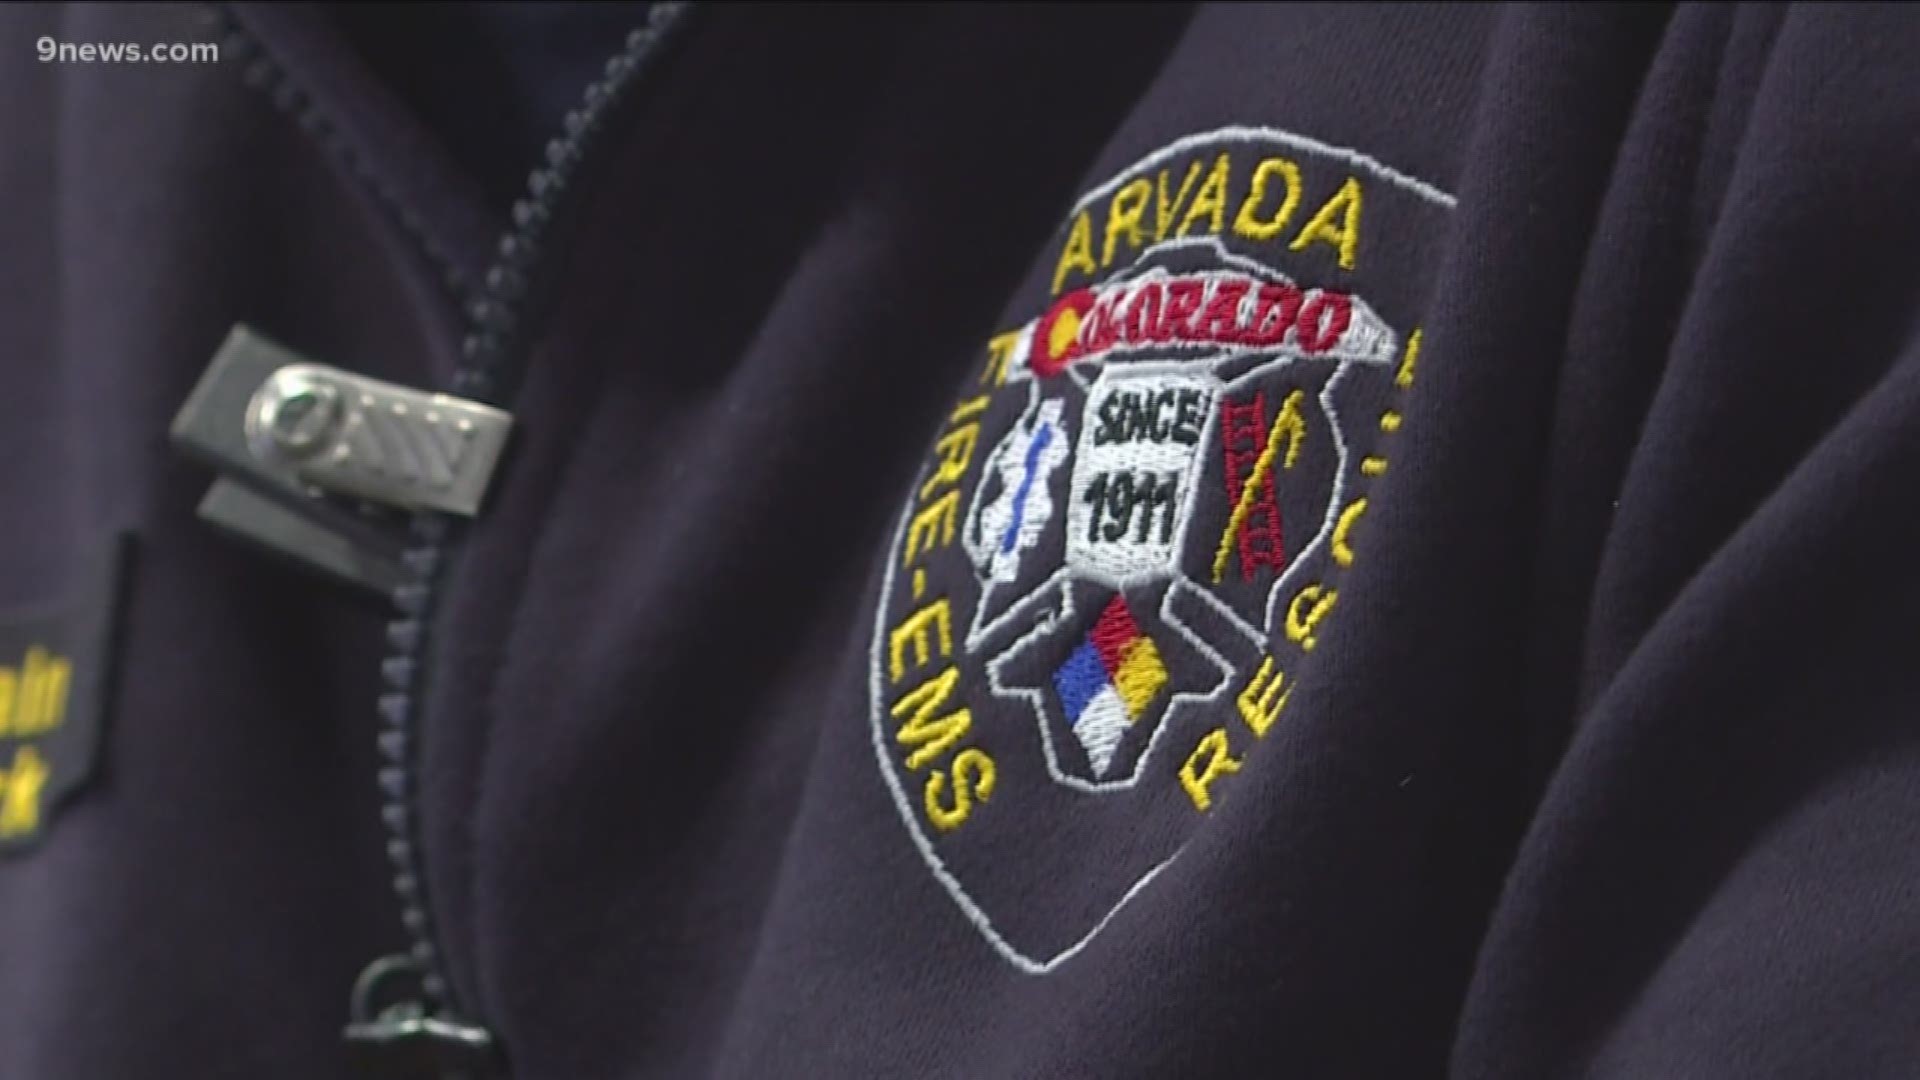 Arvada firefighters said the PulsePoint app helped them recently save someone's life.